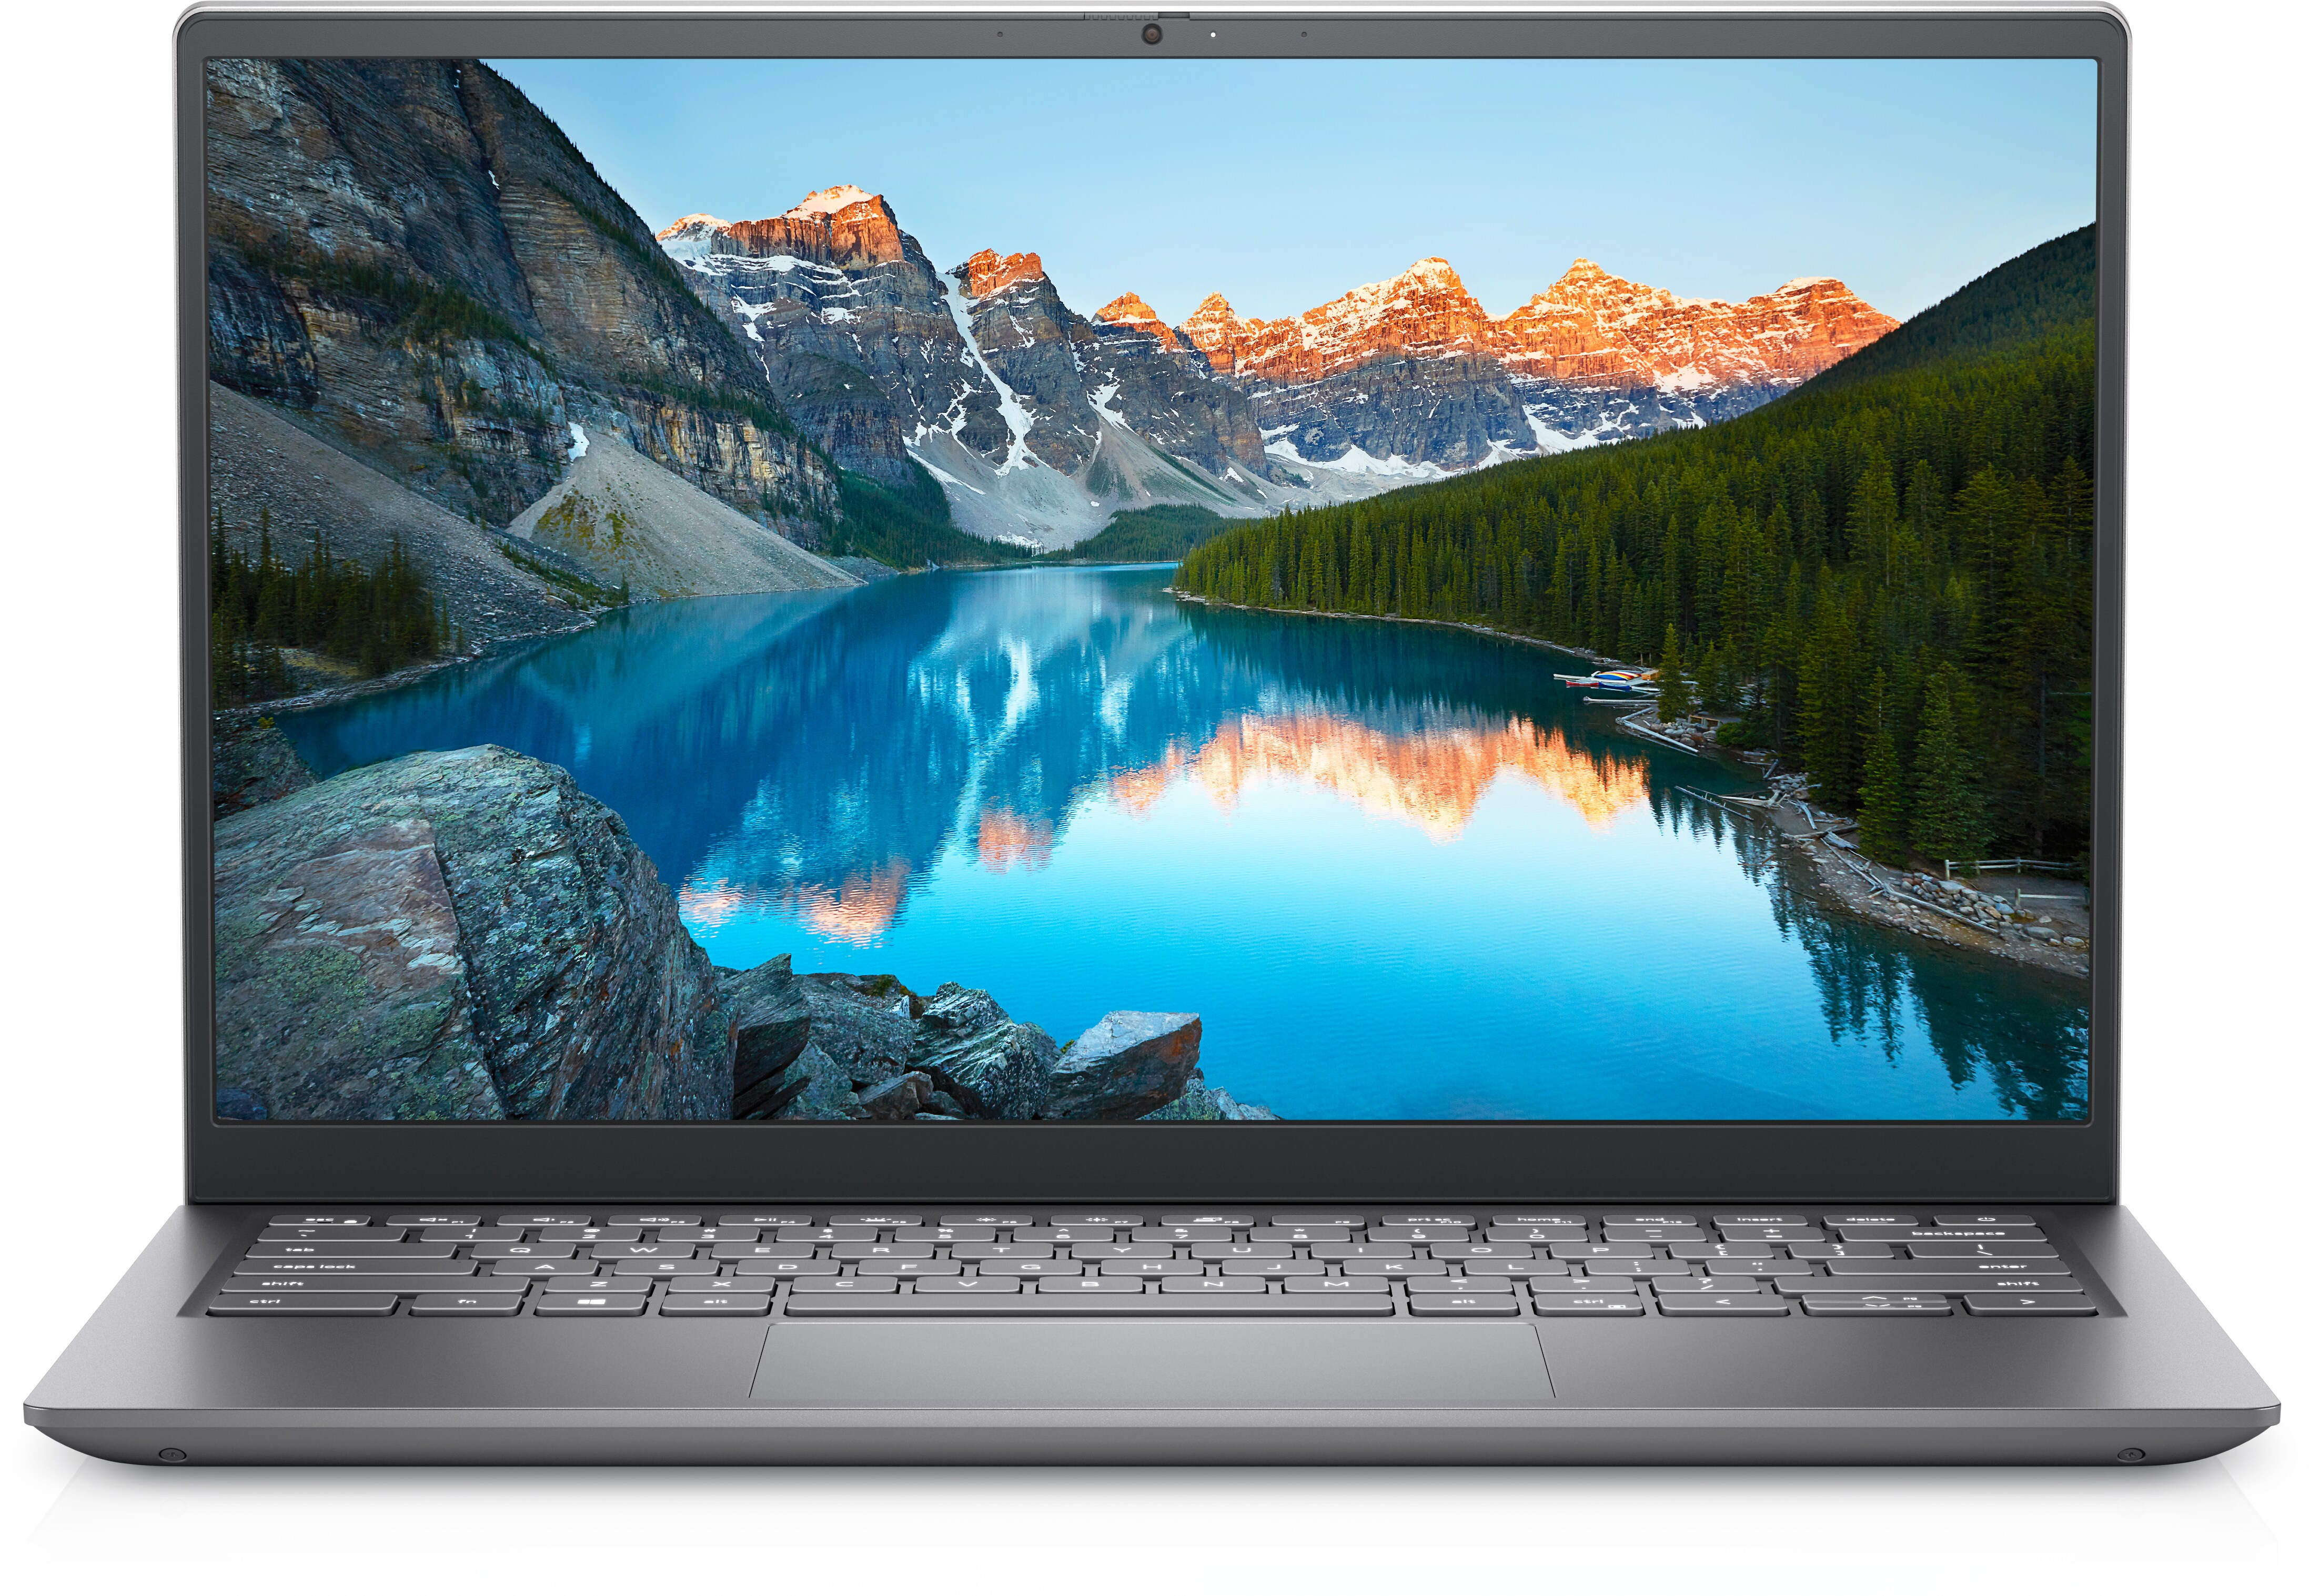 Dell Inspiron 14 5000 Series Laptop | Dell India